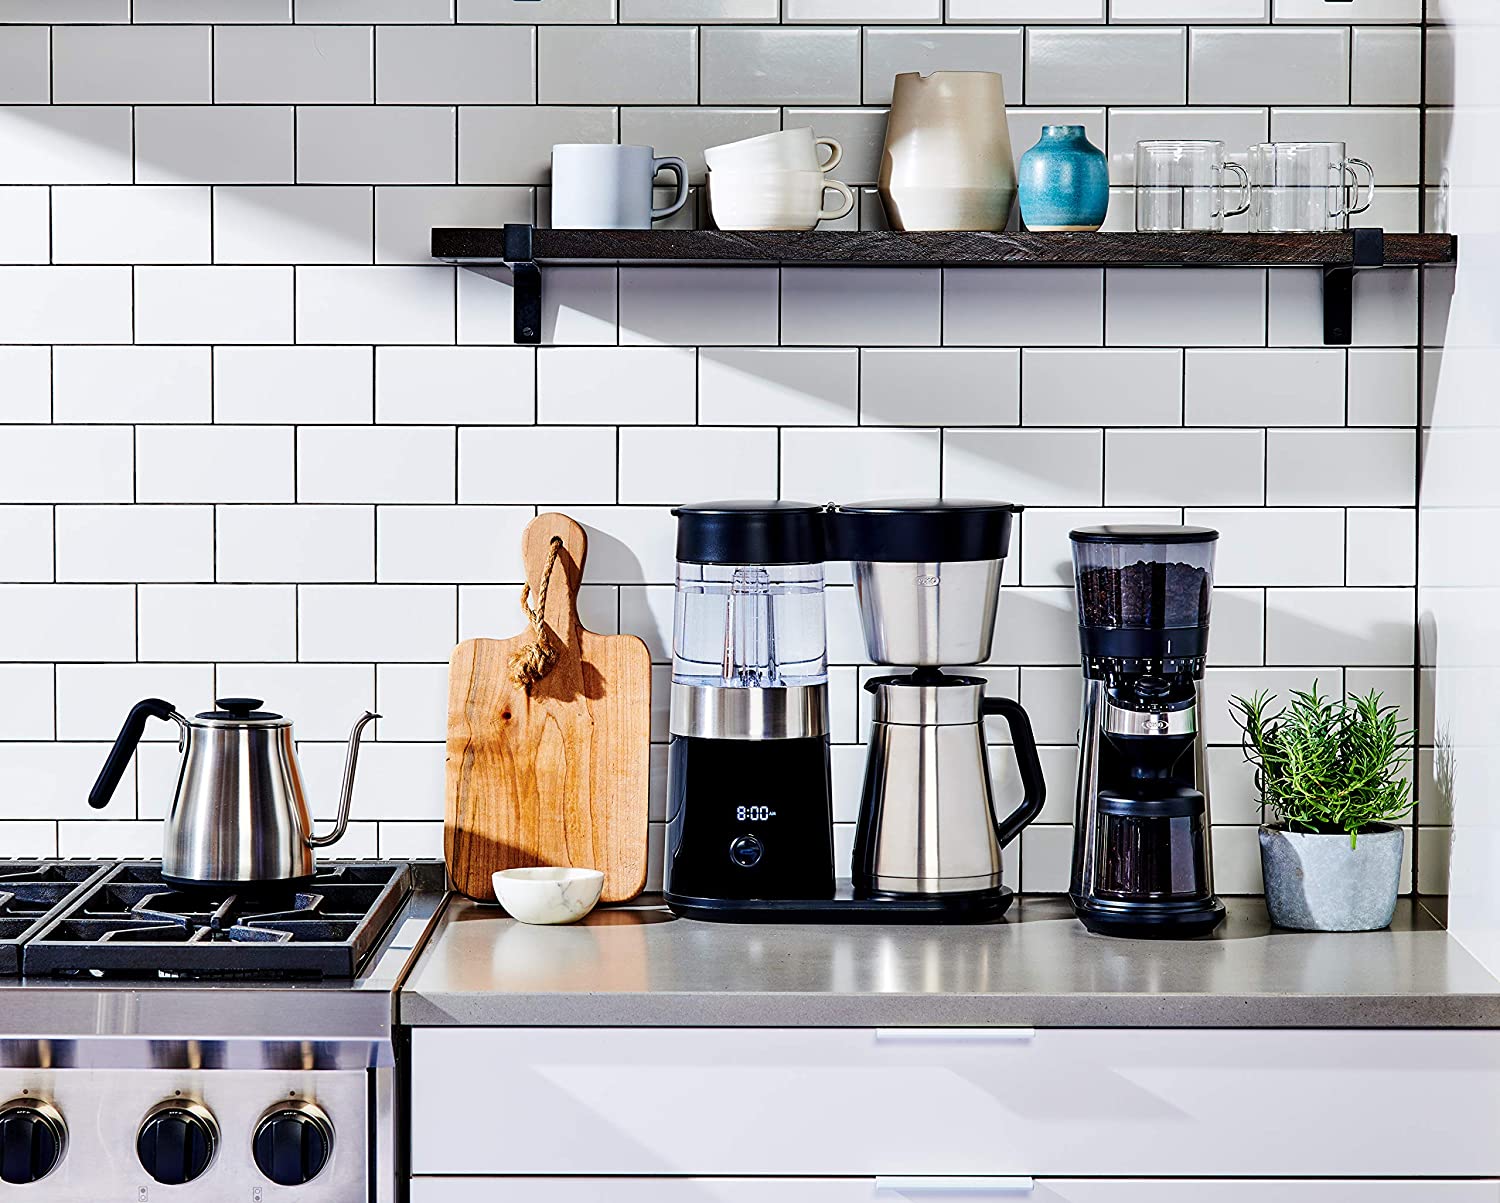 The 5 best coffee makers